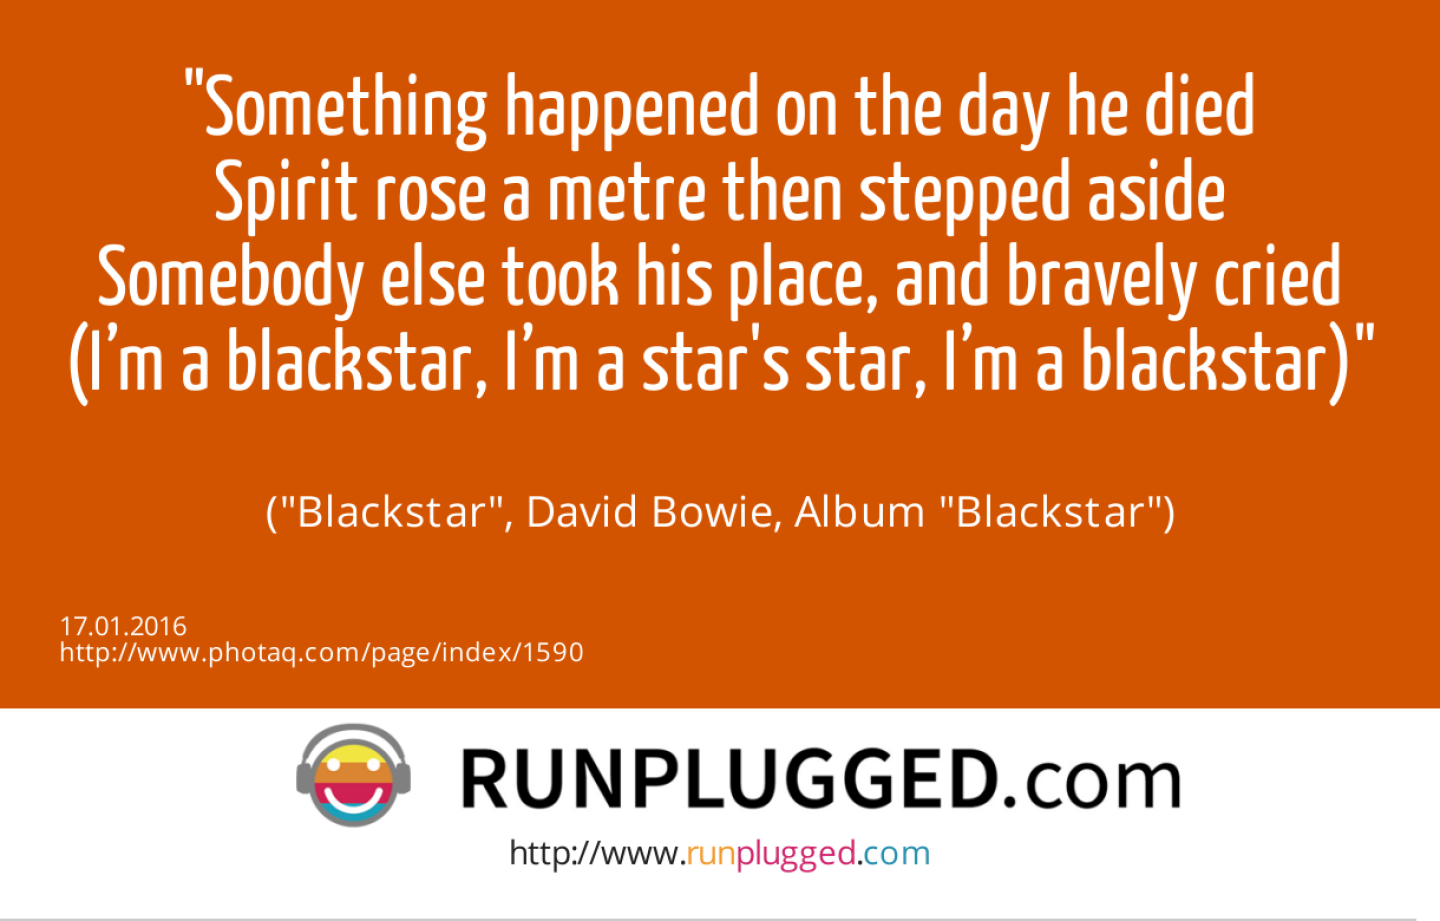 13.1. Something happened on the day he died<br>Spirit rose a metre then stepped aside<br>Somebody else took his place, and bravely cried<br>(I’m a blackstar, I’m a star's star, I’m a blackstar)<br><br> (Blackstar, David Bowie, Album Blackstar)